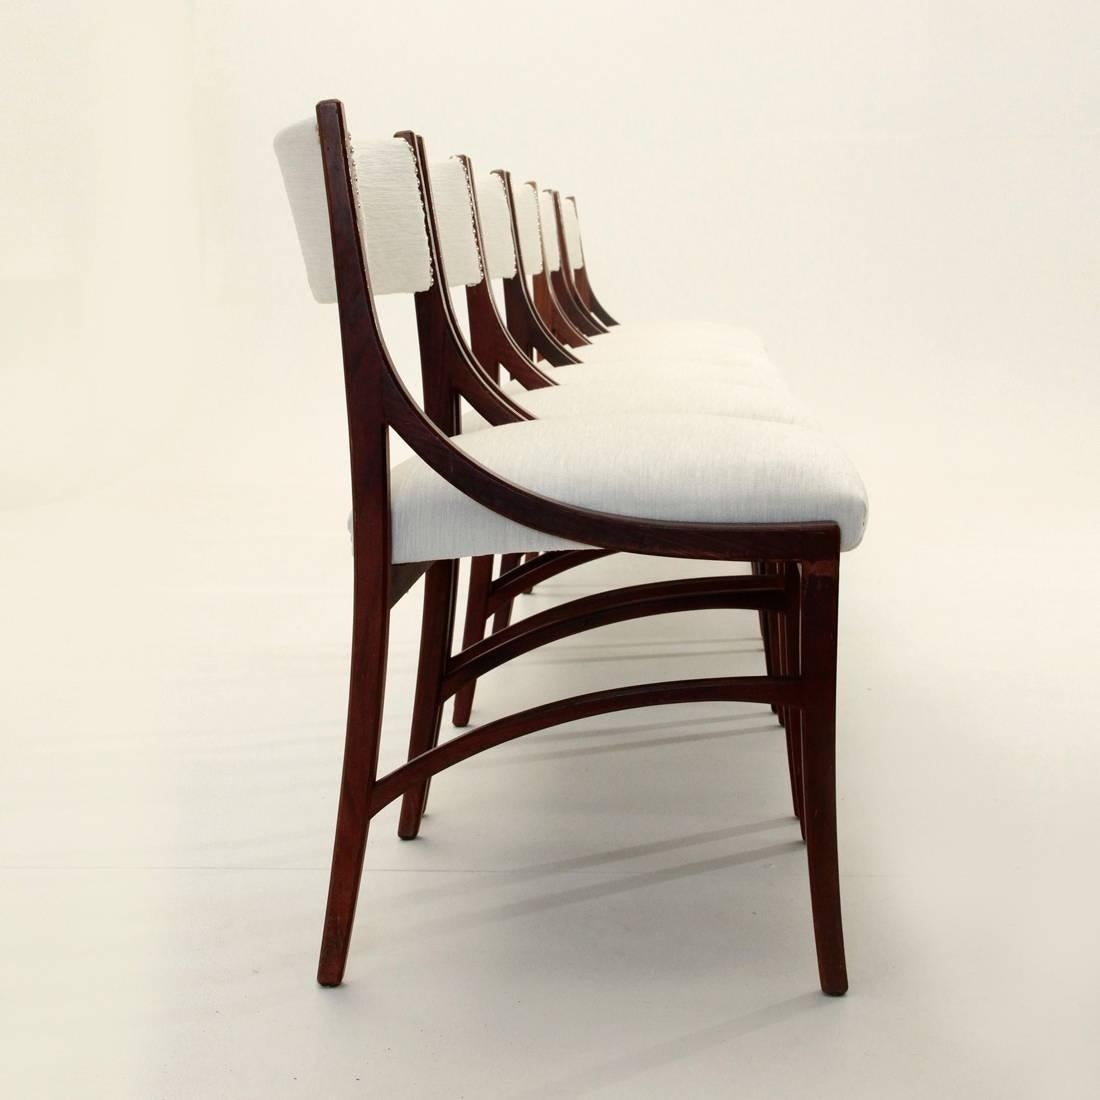 Model 110 chairs
Variant with padded backrests
Designed by Ico Parisi for Cassina in 1961
Frame in rosewood
White velvet lining.